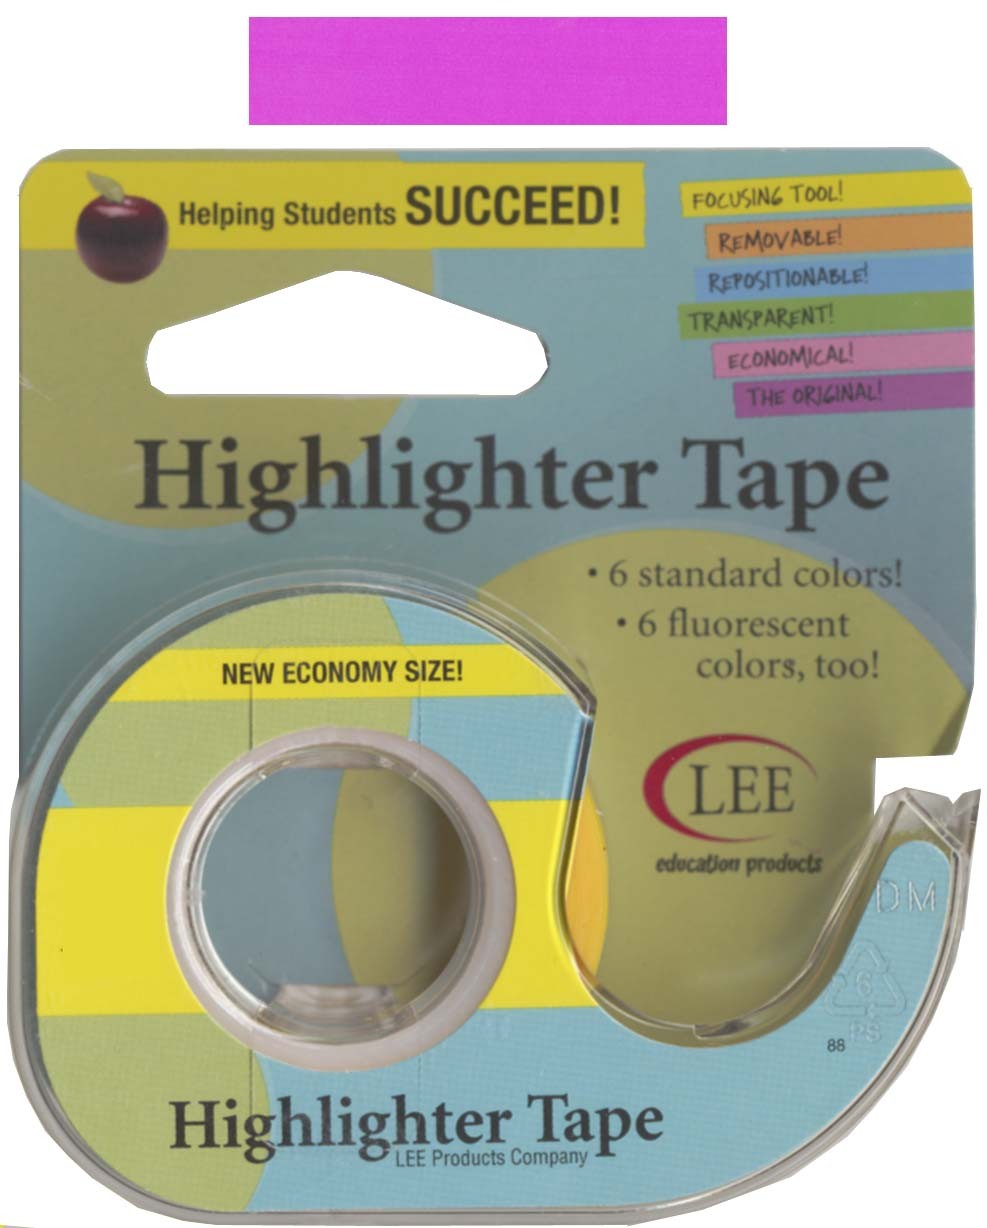 Removable Highlighter Tape 1/2in x 11yds Green 